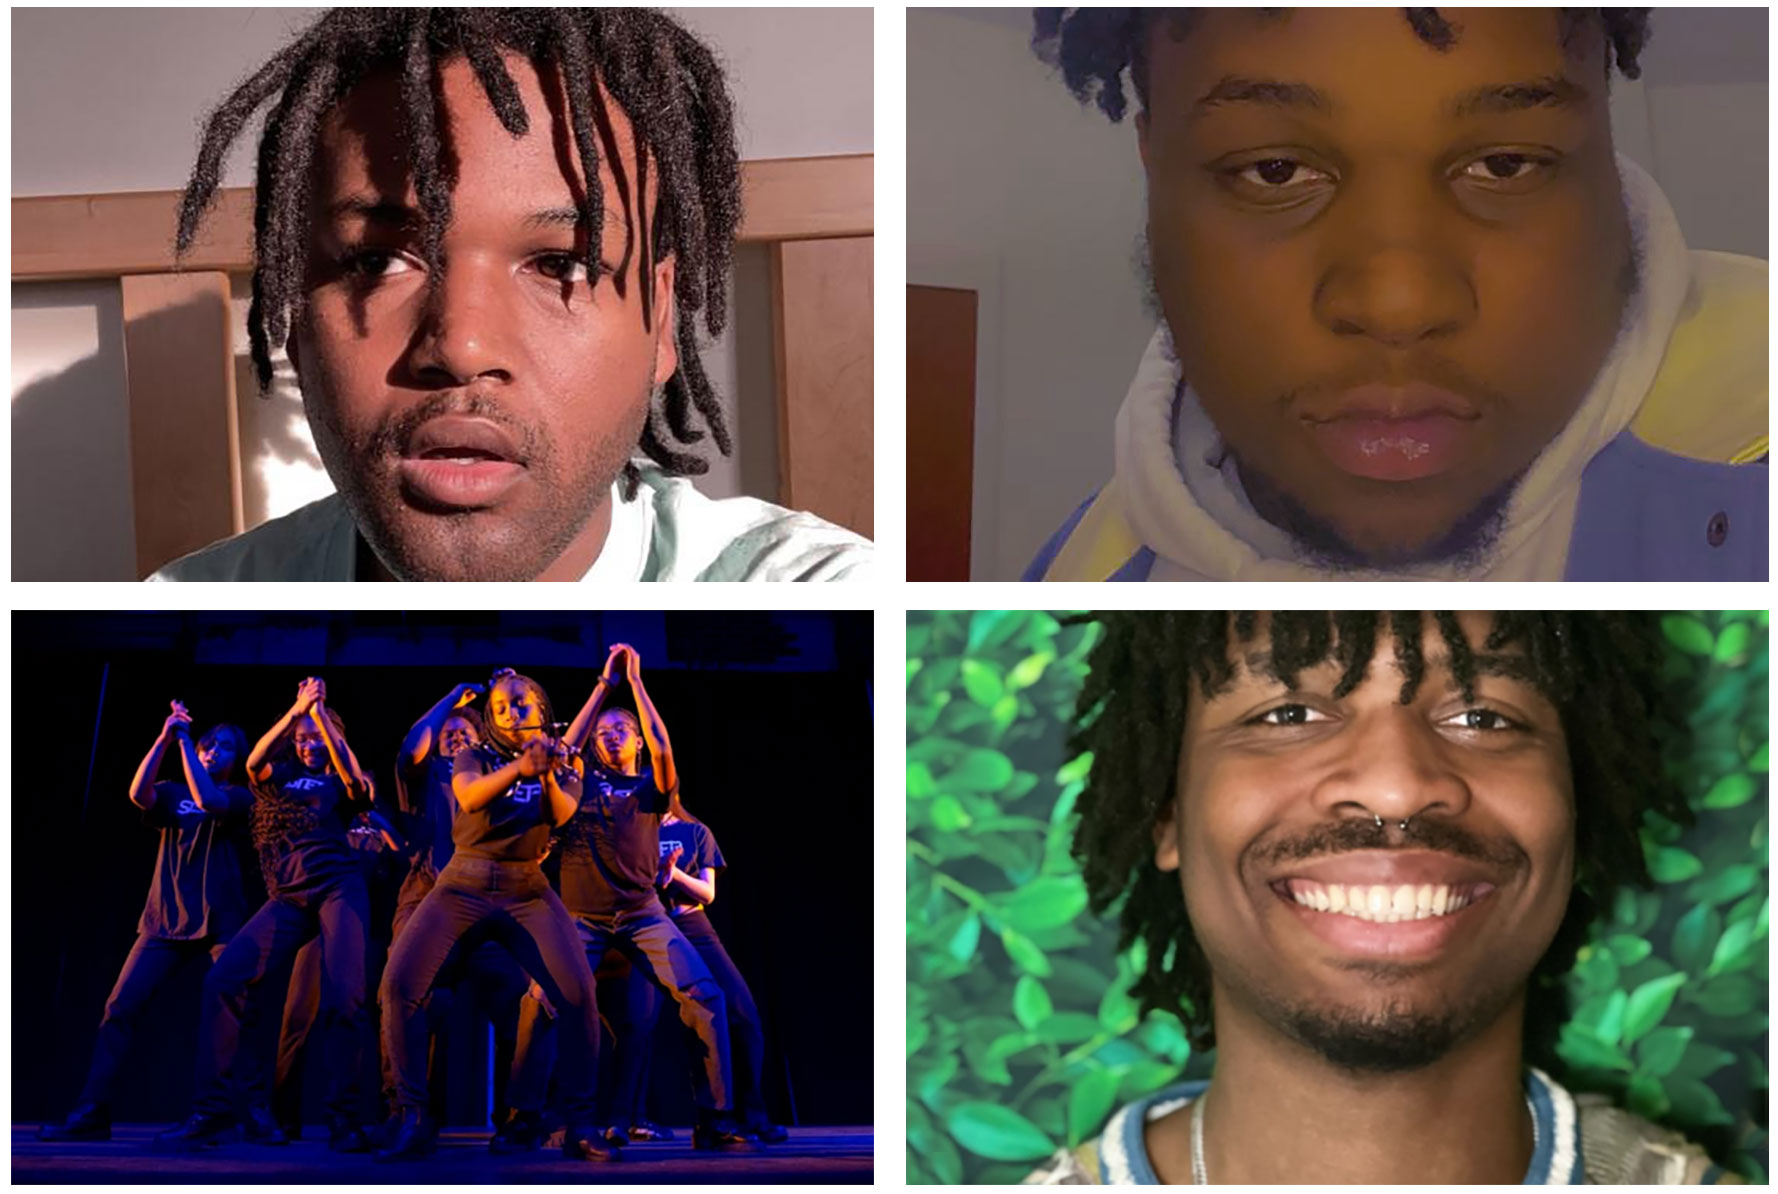 Self portraits of three young Black men and a photo of a group of dancers performing on stage